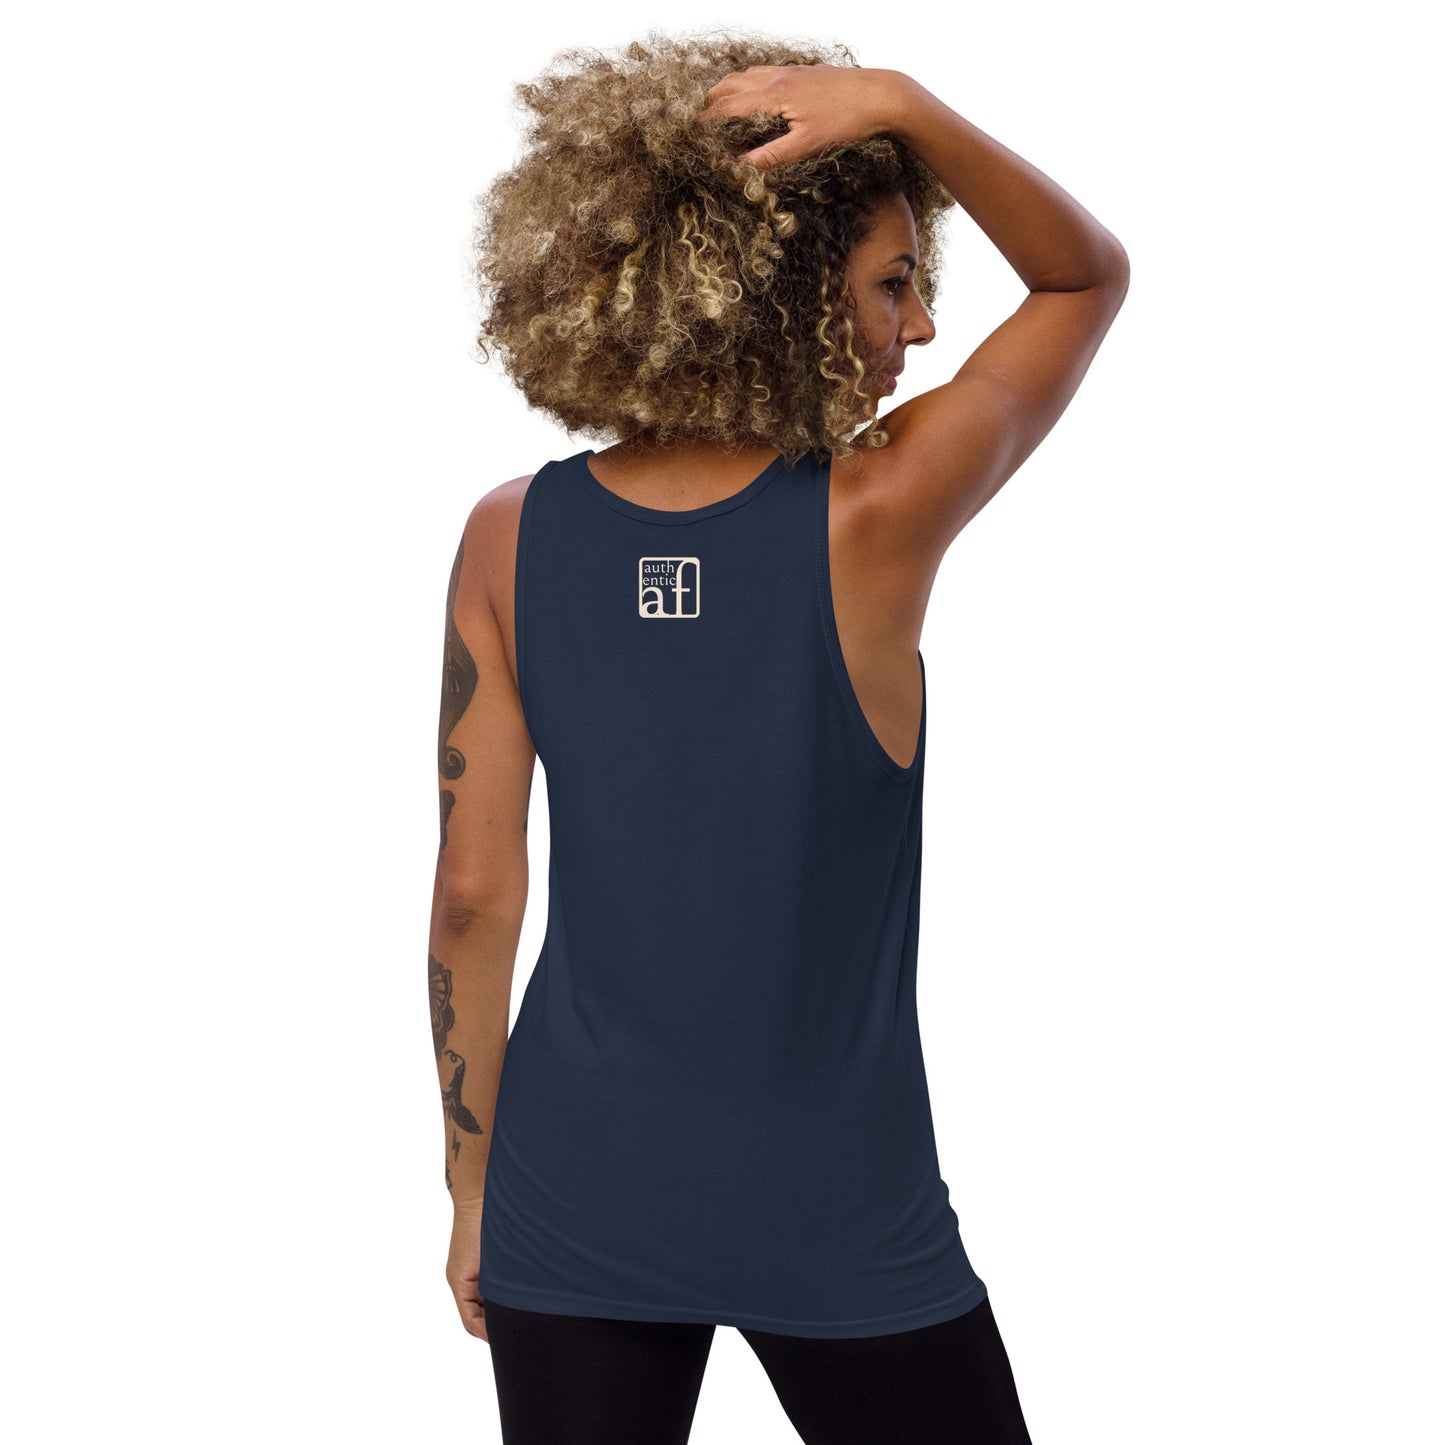 Emotional Support Human unisex muscle tank